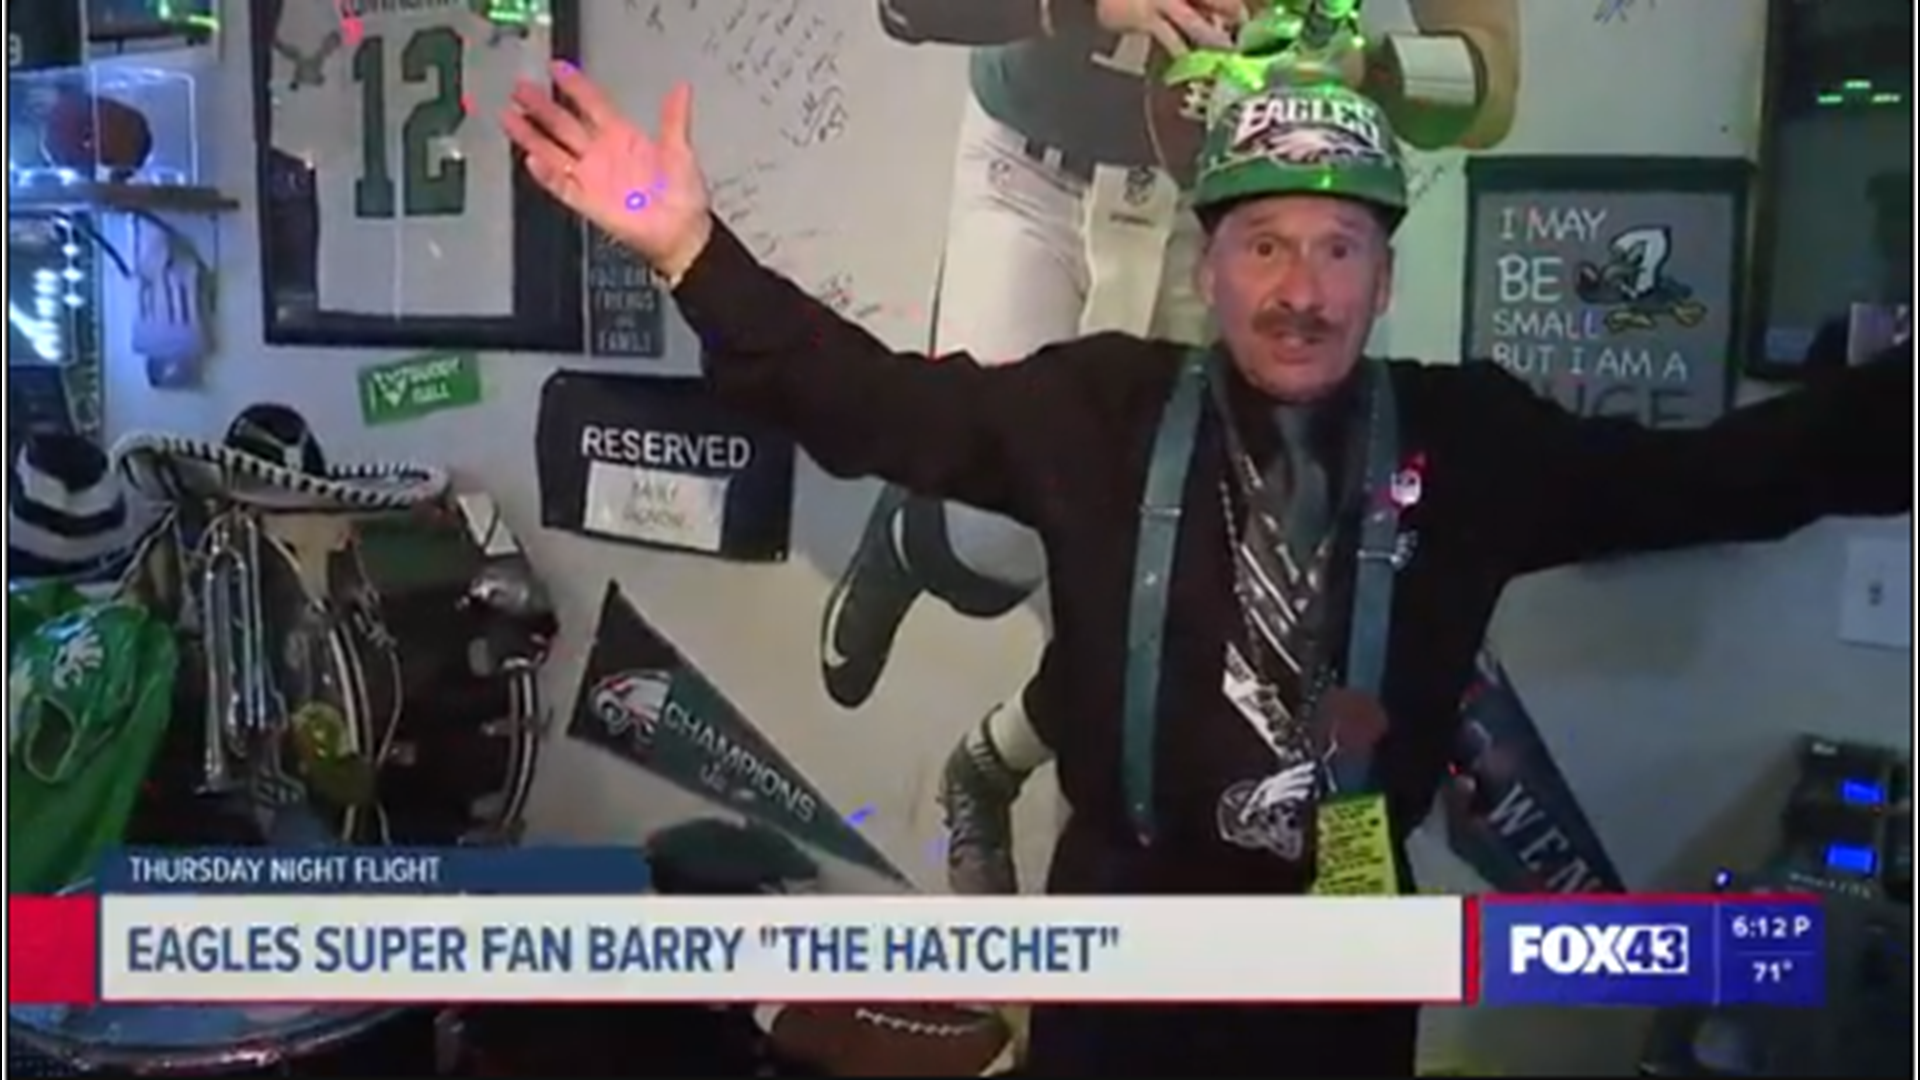 He may be small in stature, but Barry "The Hatchet" Vagnoni's love of the Eagles is as huge as it gets. He is now also featured in a documentary on Eagles fans.